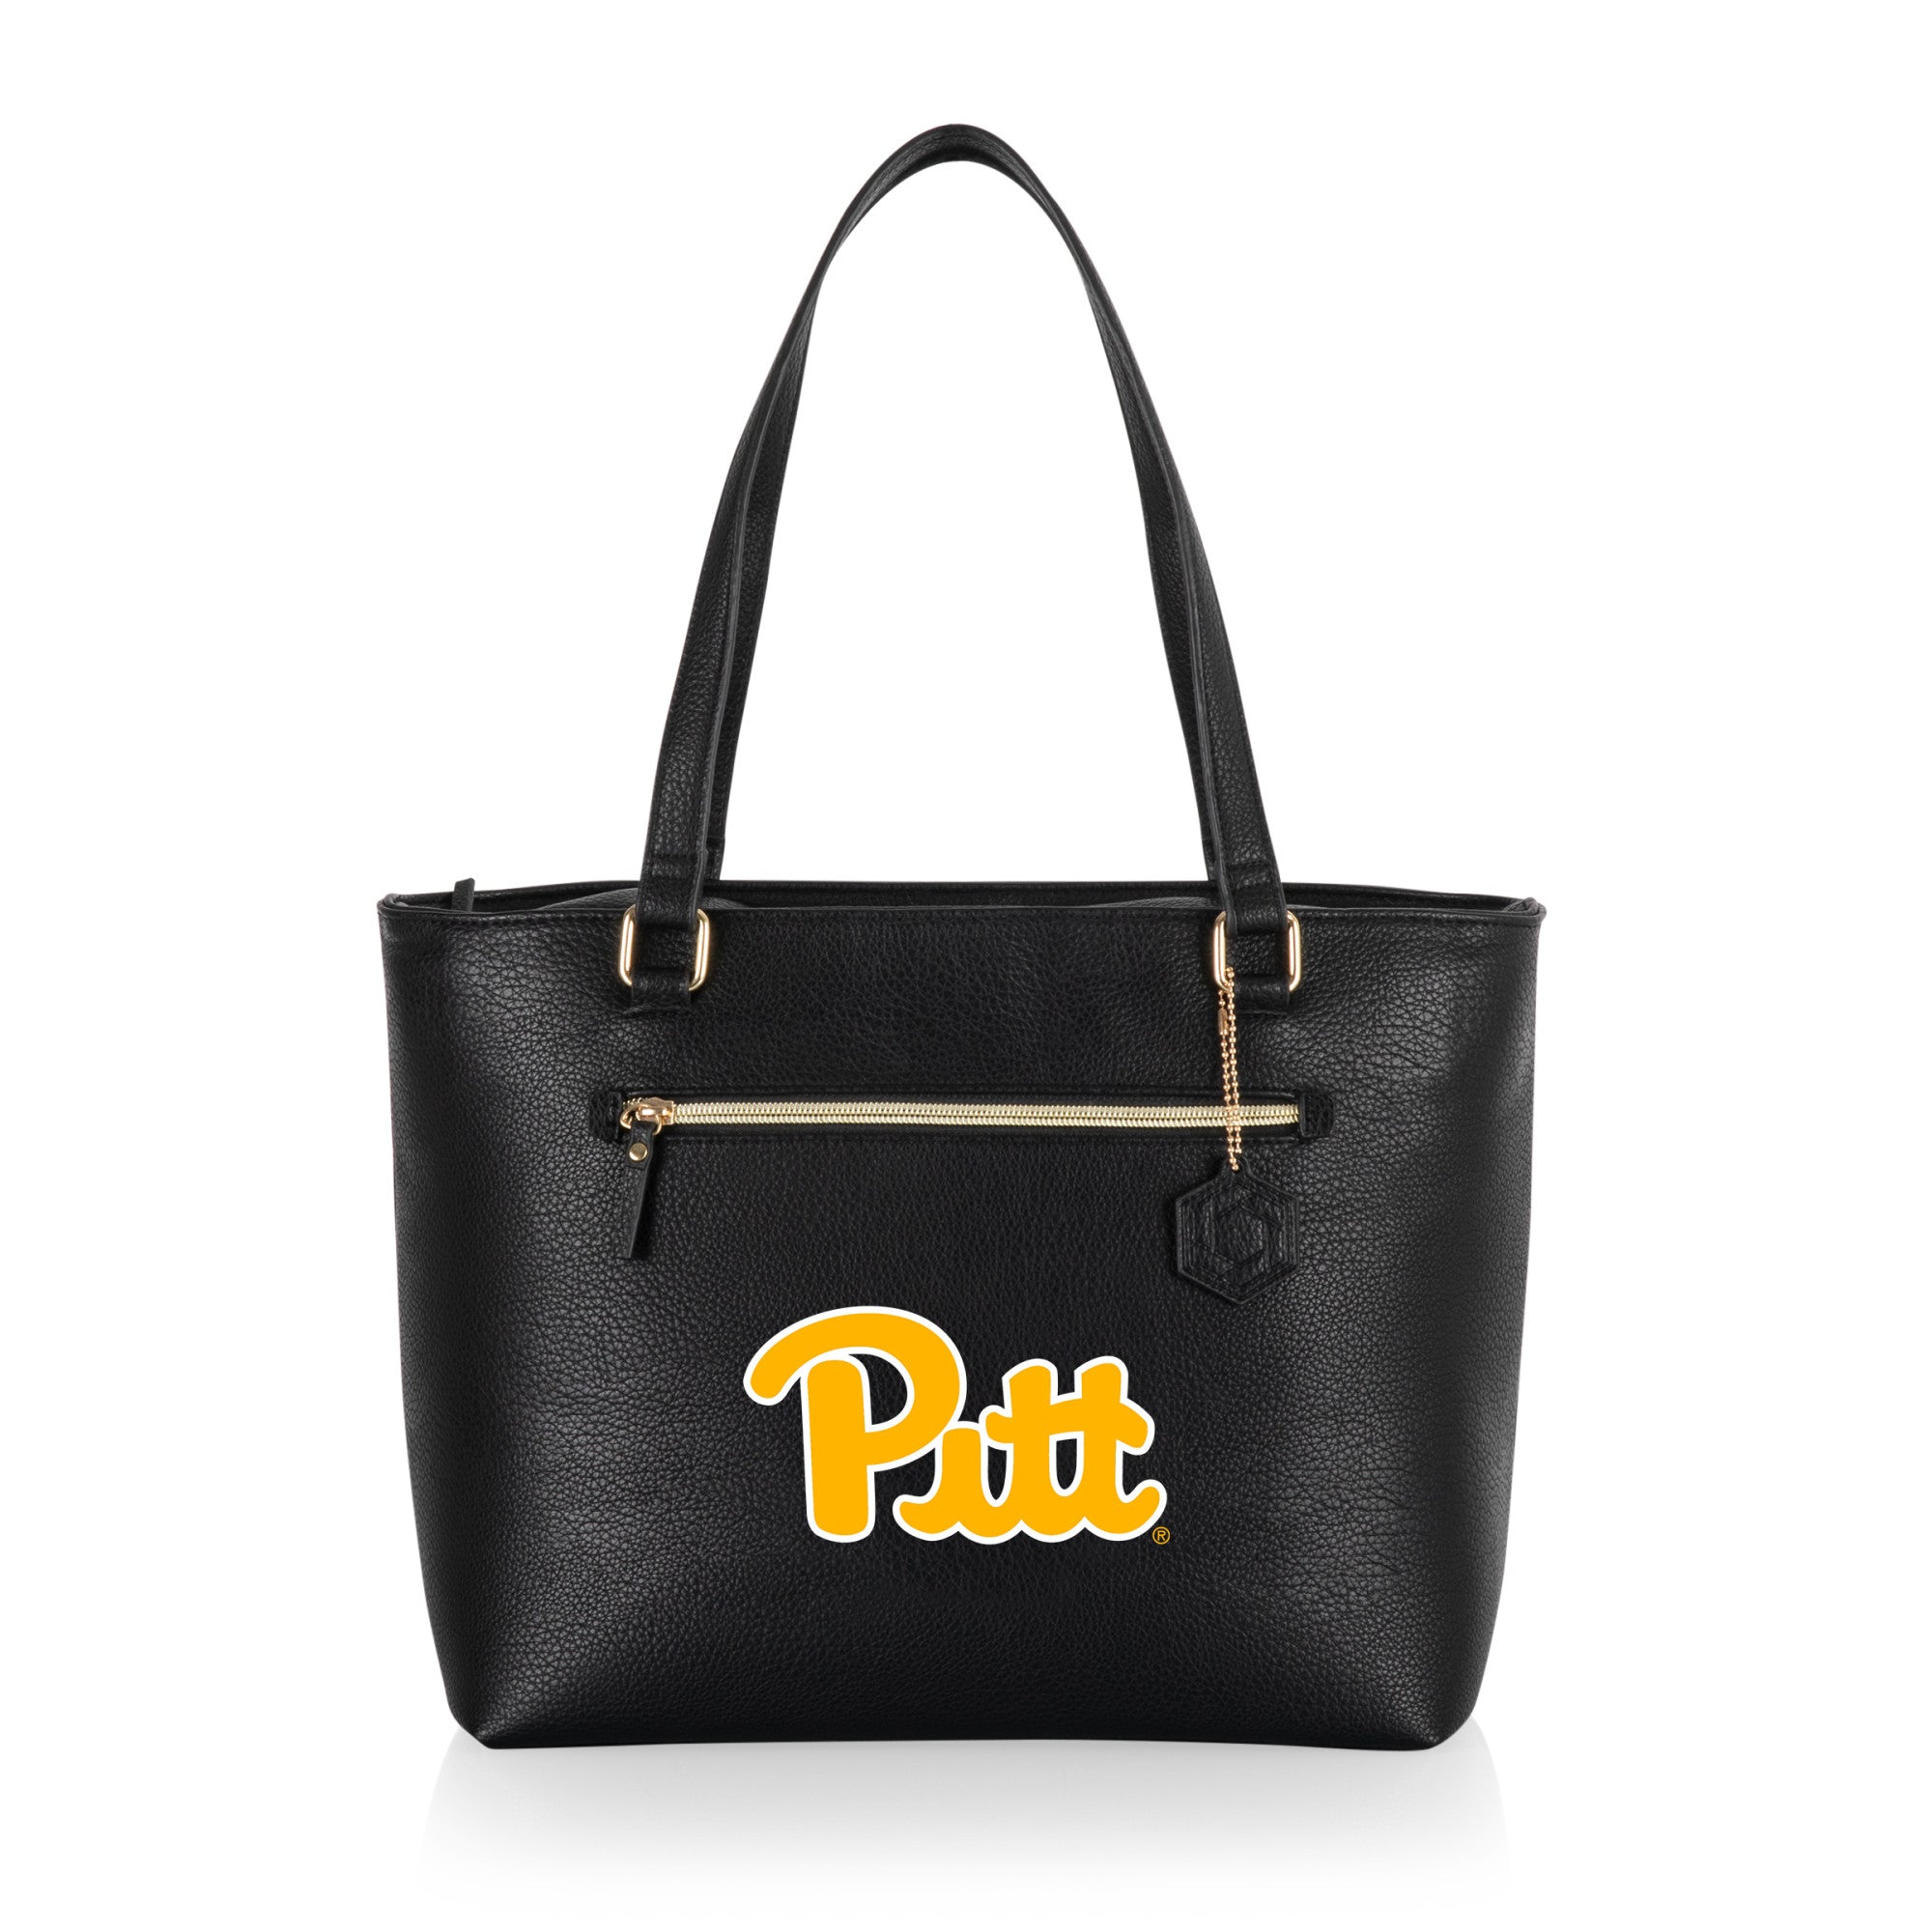 Pittsburgh Panthers - Uptown Cooler Tote Bag